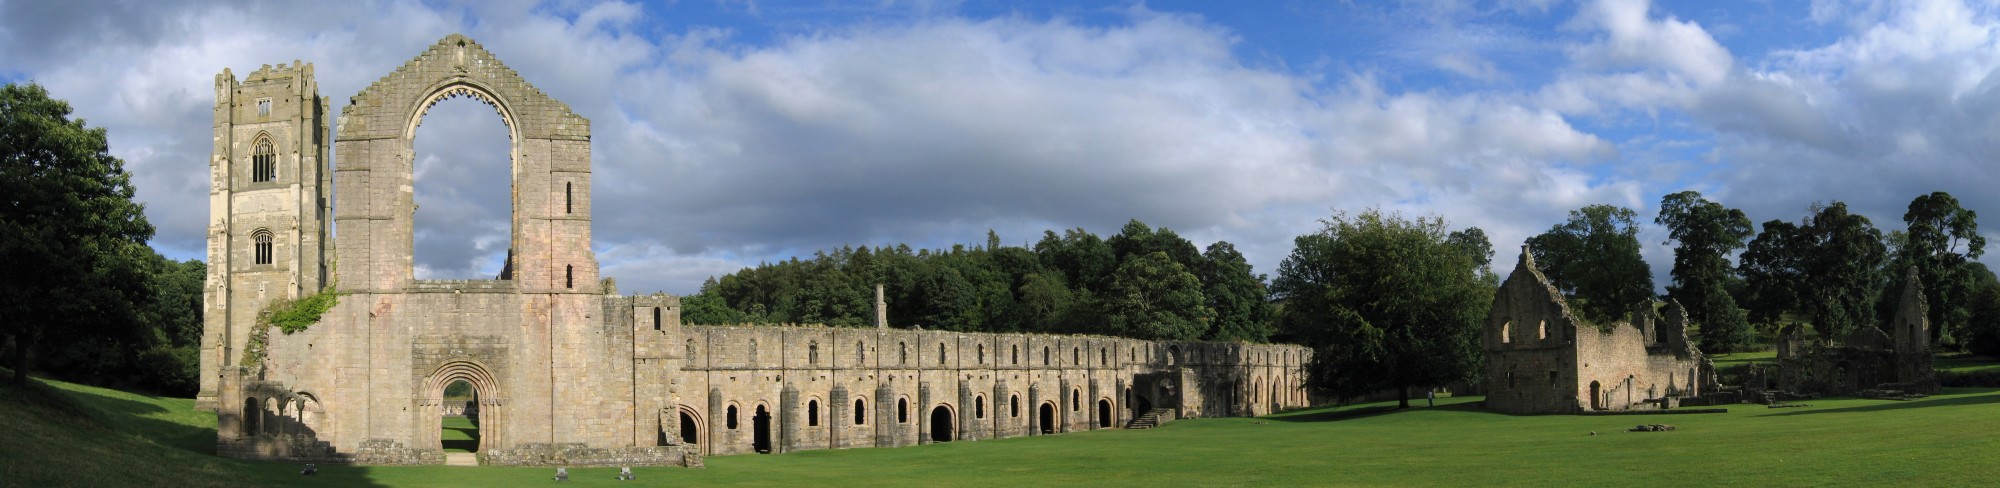 Fountains Abbey view crop1mod 2005-08-27